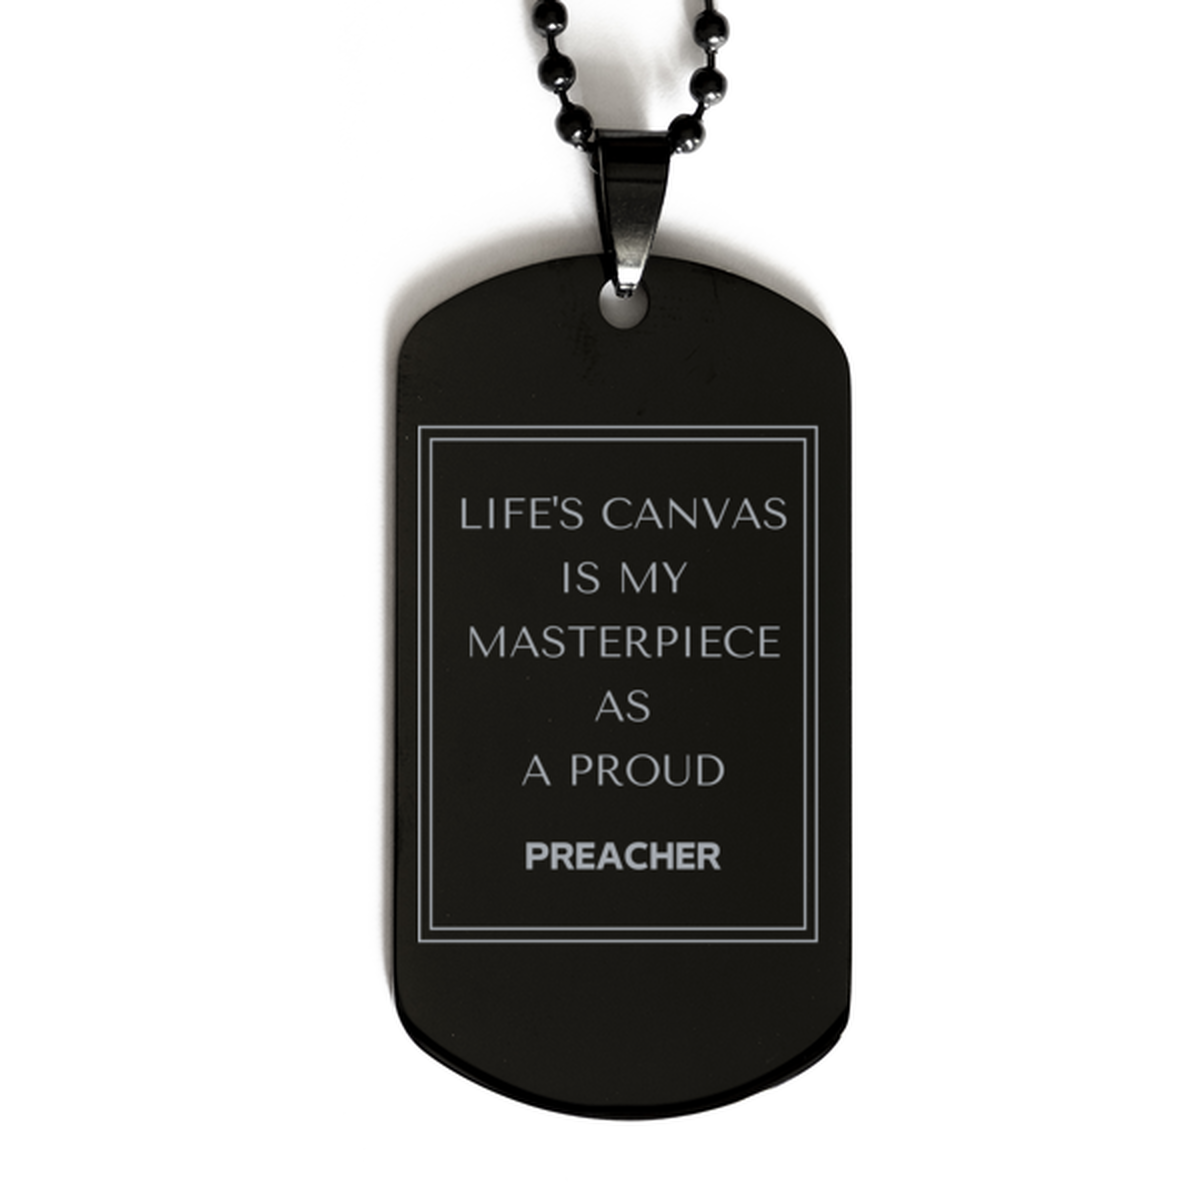 Proud Preacher Gifts, Life's canvas is my masterpiece, Epic Birthday Christmas Unique Black Dog Tag For Preacher, Coworkers, Men, Women, Friends